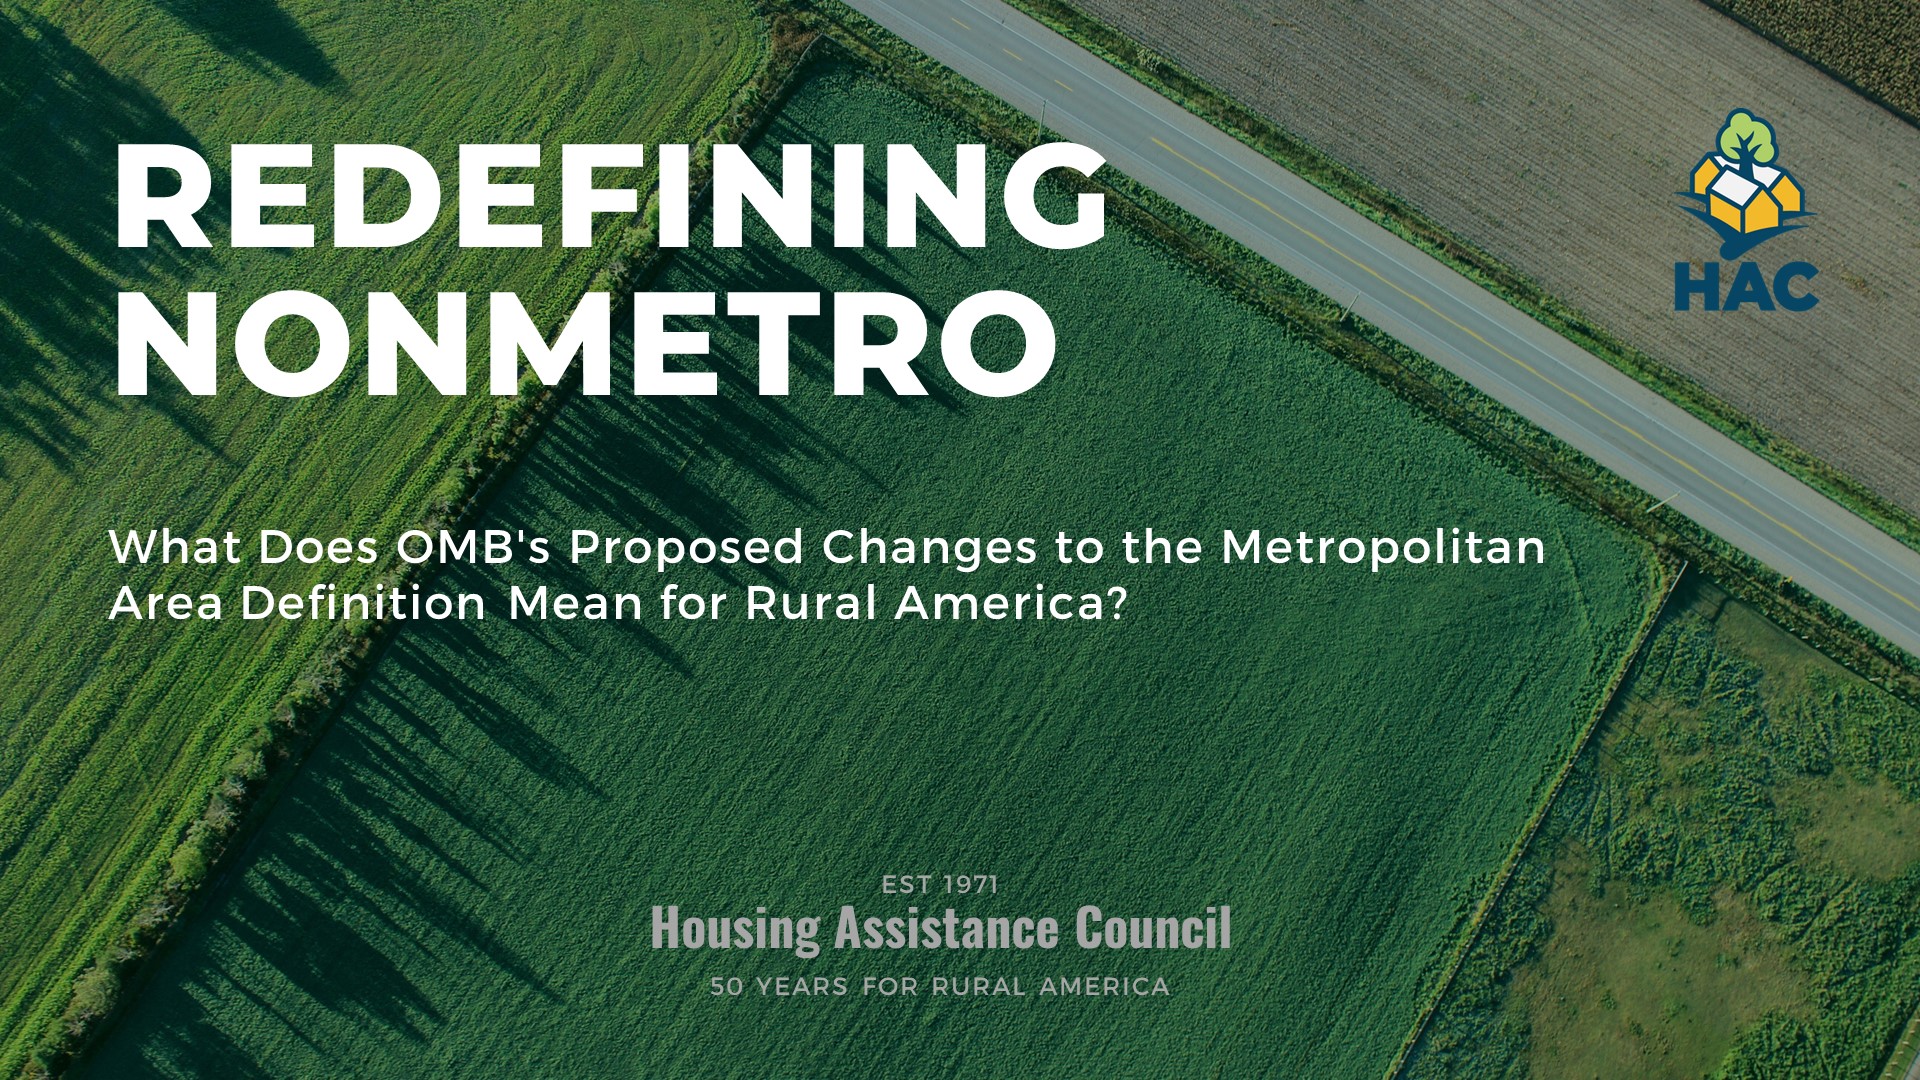 Redefining Nonmetro - What does OMB's Changes to the MSA Definition Mean